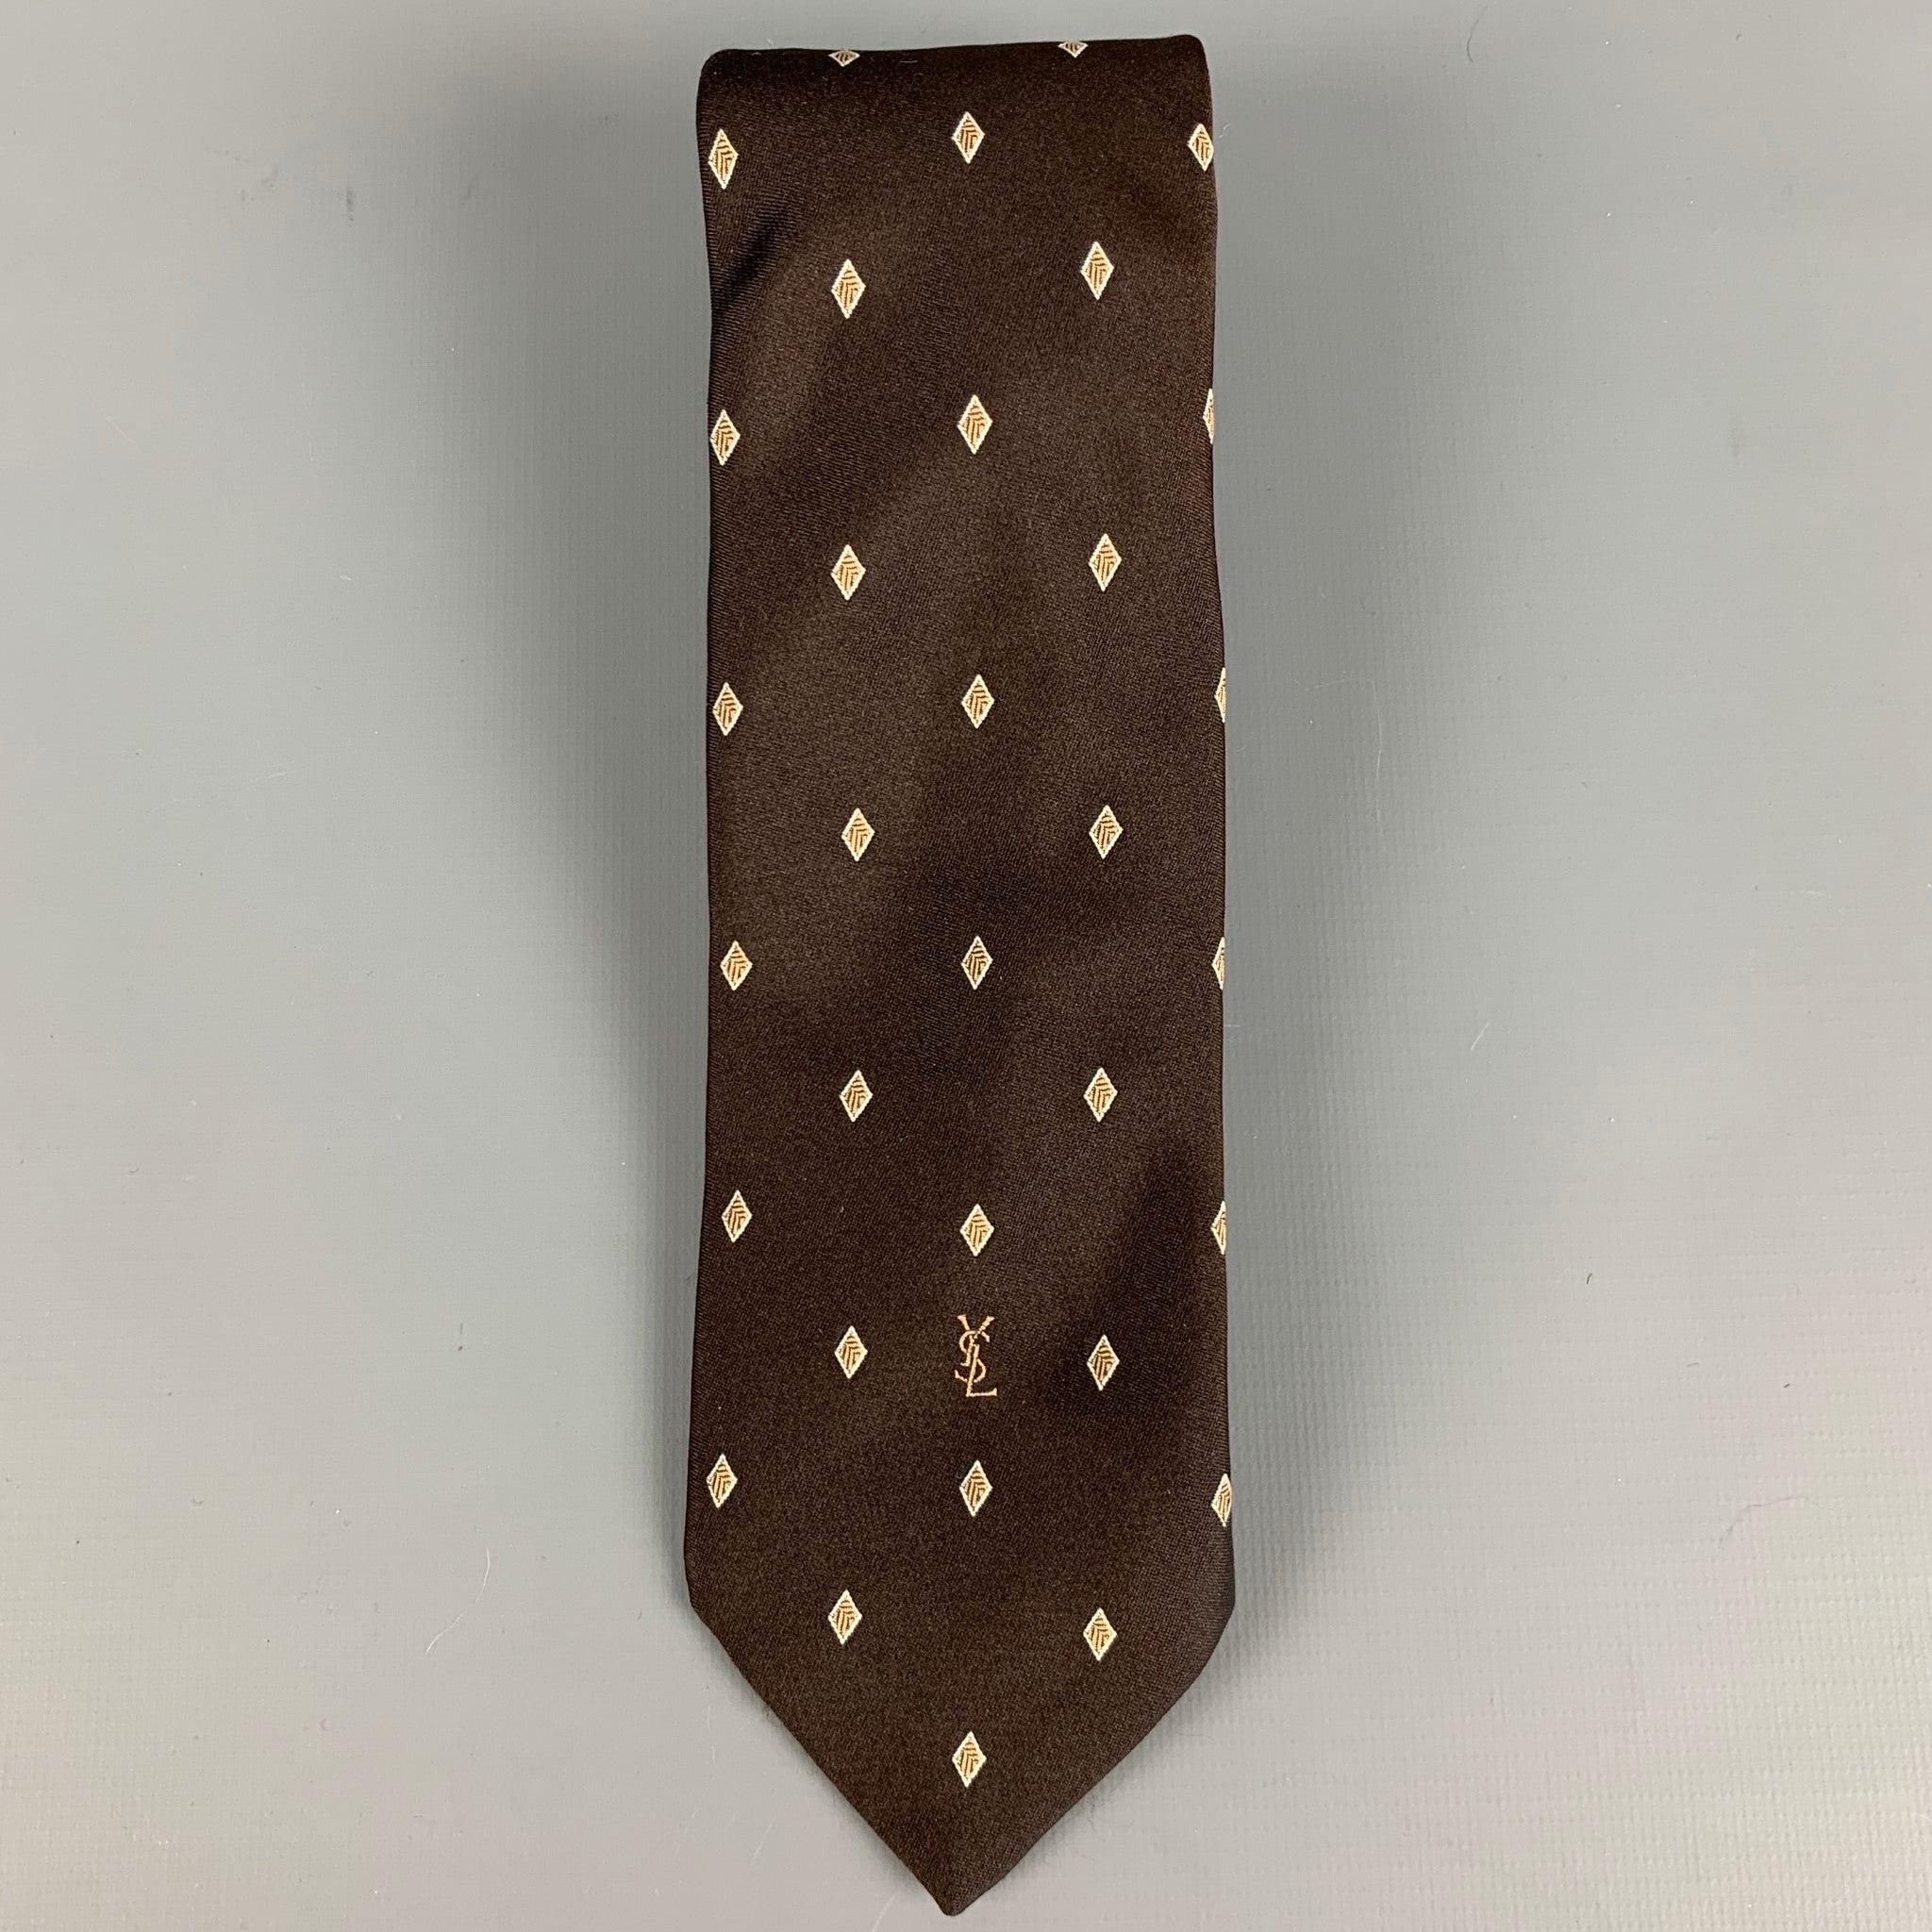 YVES SAINT LAURENT
necktie in a brown silk fabric featuring yellow diamond jacquard pattern and skinny fit. Excellent Pre-Owned Condition. 

Measurements: 
  Width: 2.5 inches Length: 57 inches 
  
  
 
Reference: 127791
Category: Tie
More Details
 